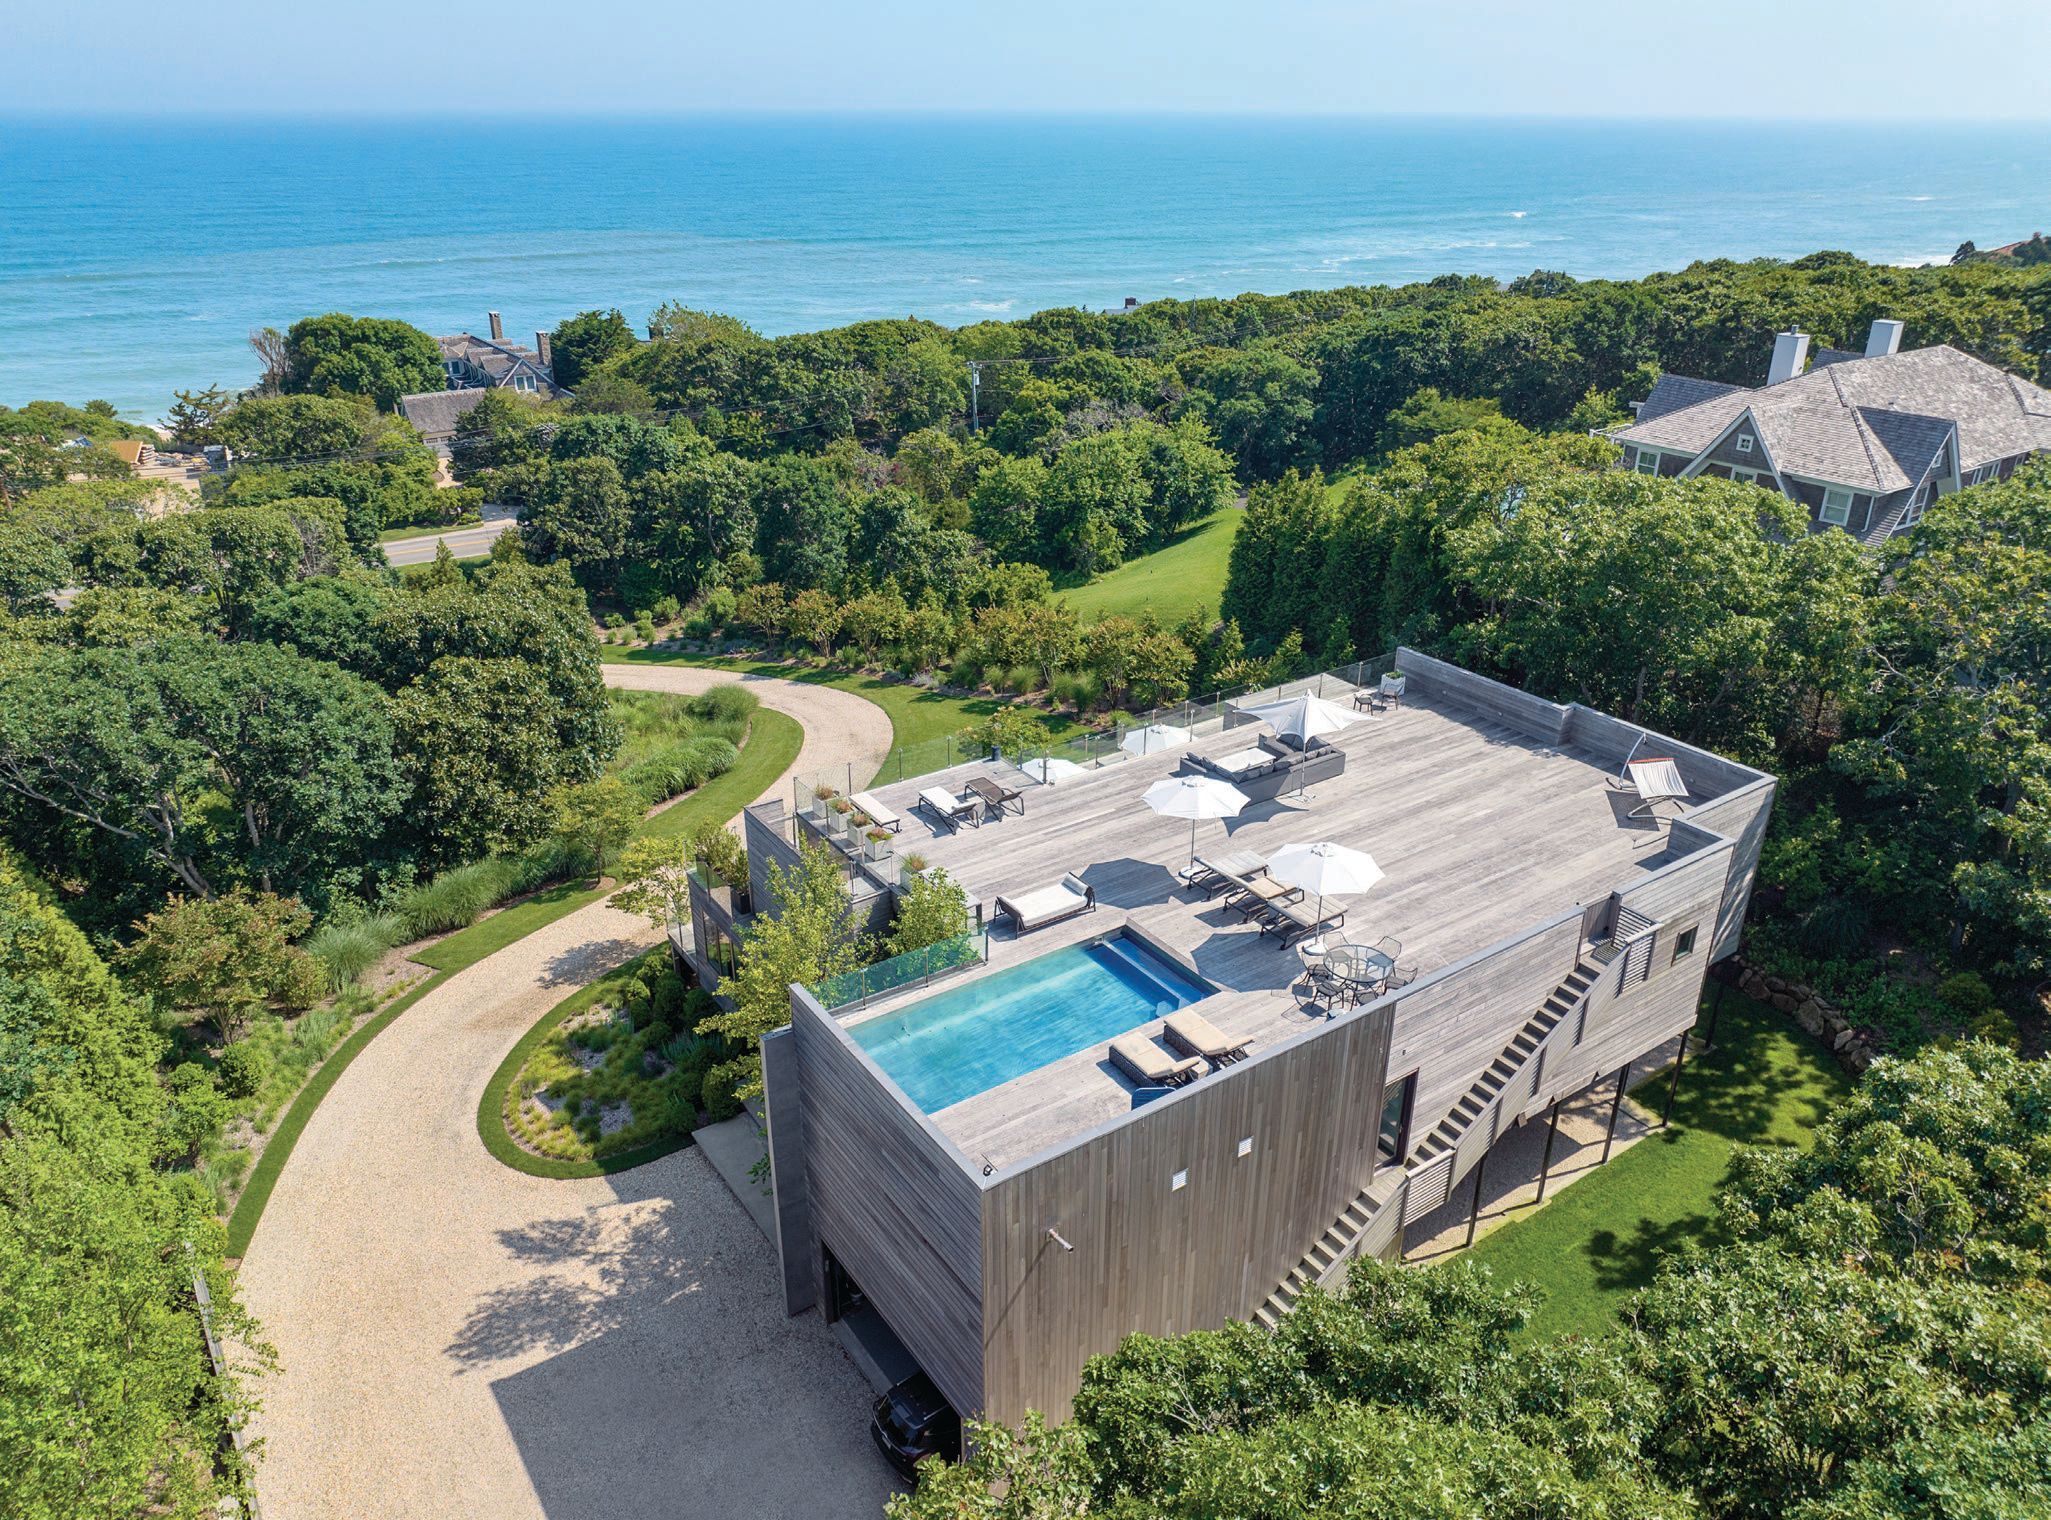 The contemporary architectural details of 225 Old Montauk Highway  PHOTO BY LIFESTYLE PRODUCTION GROUP/COURTESY OF DOUGLAS ELLIMAN